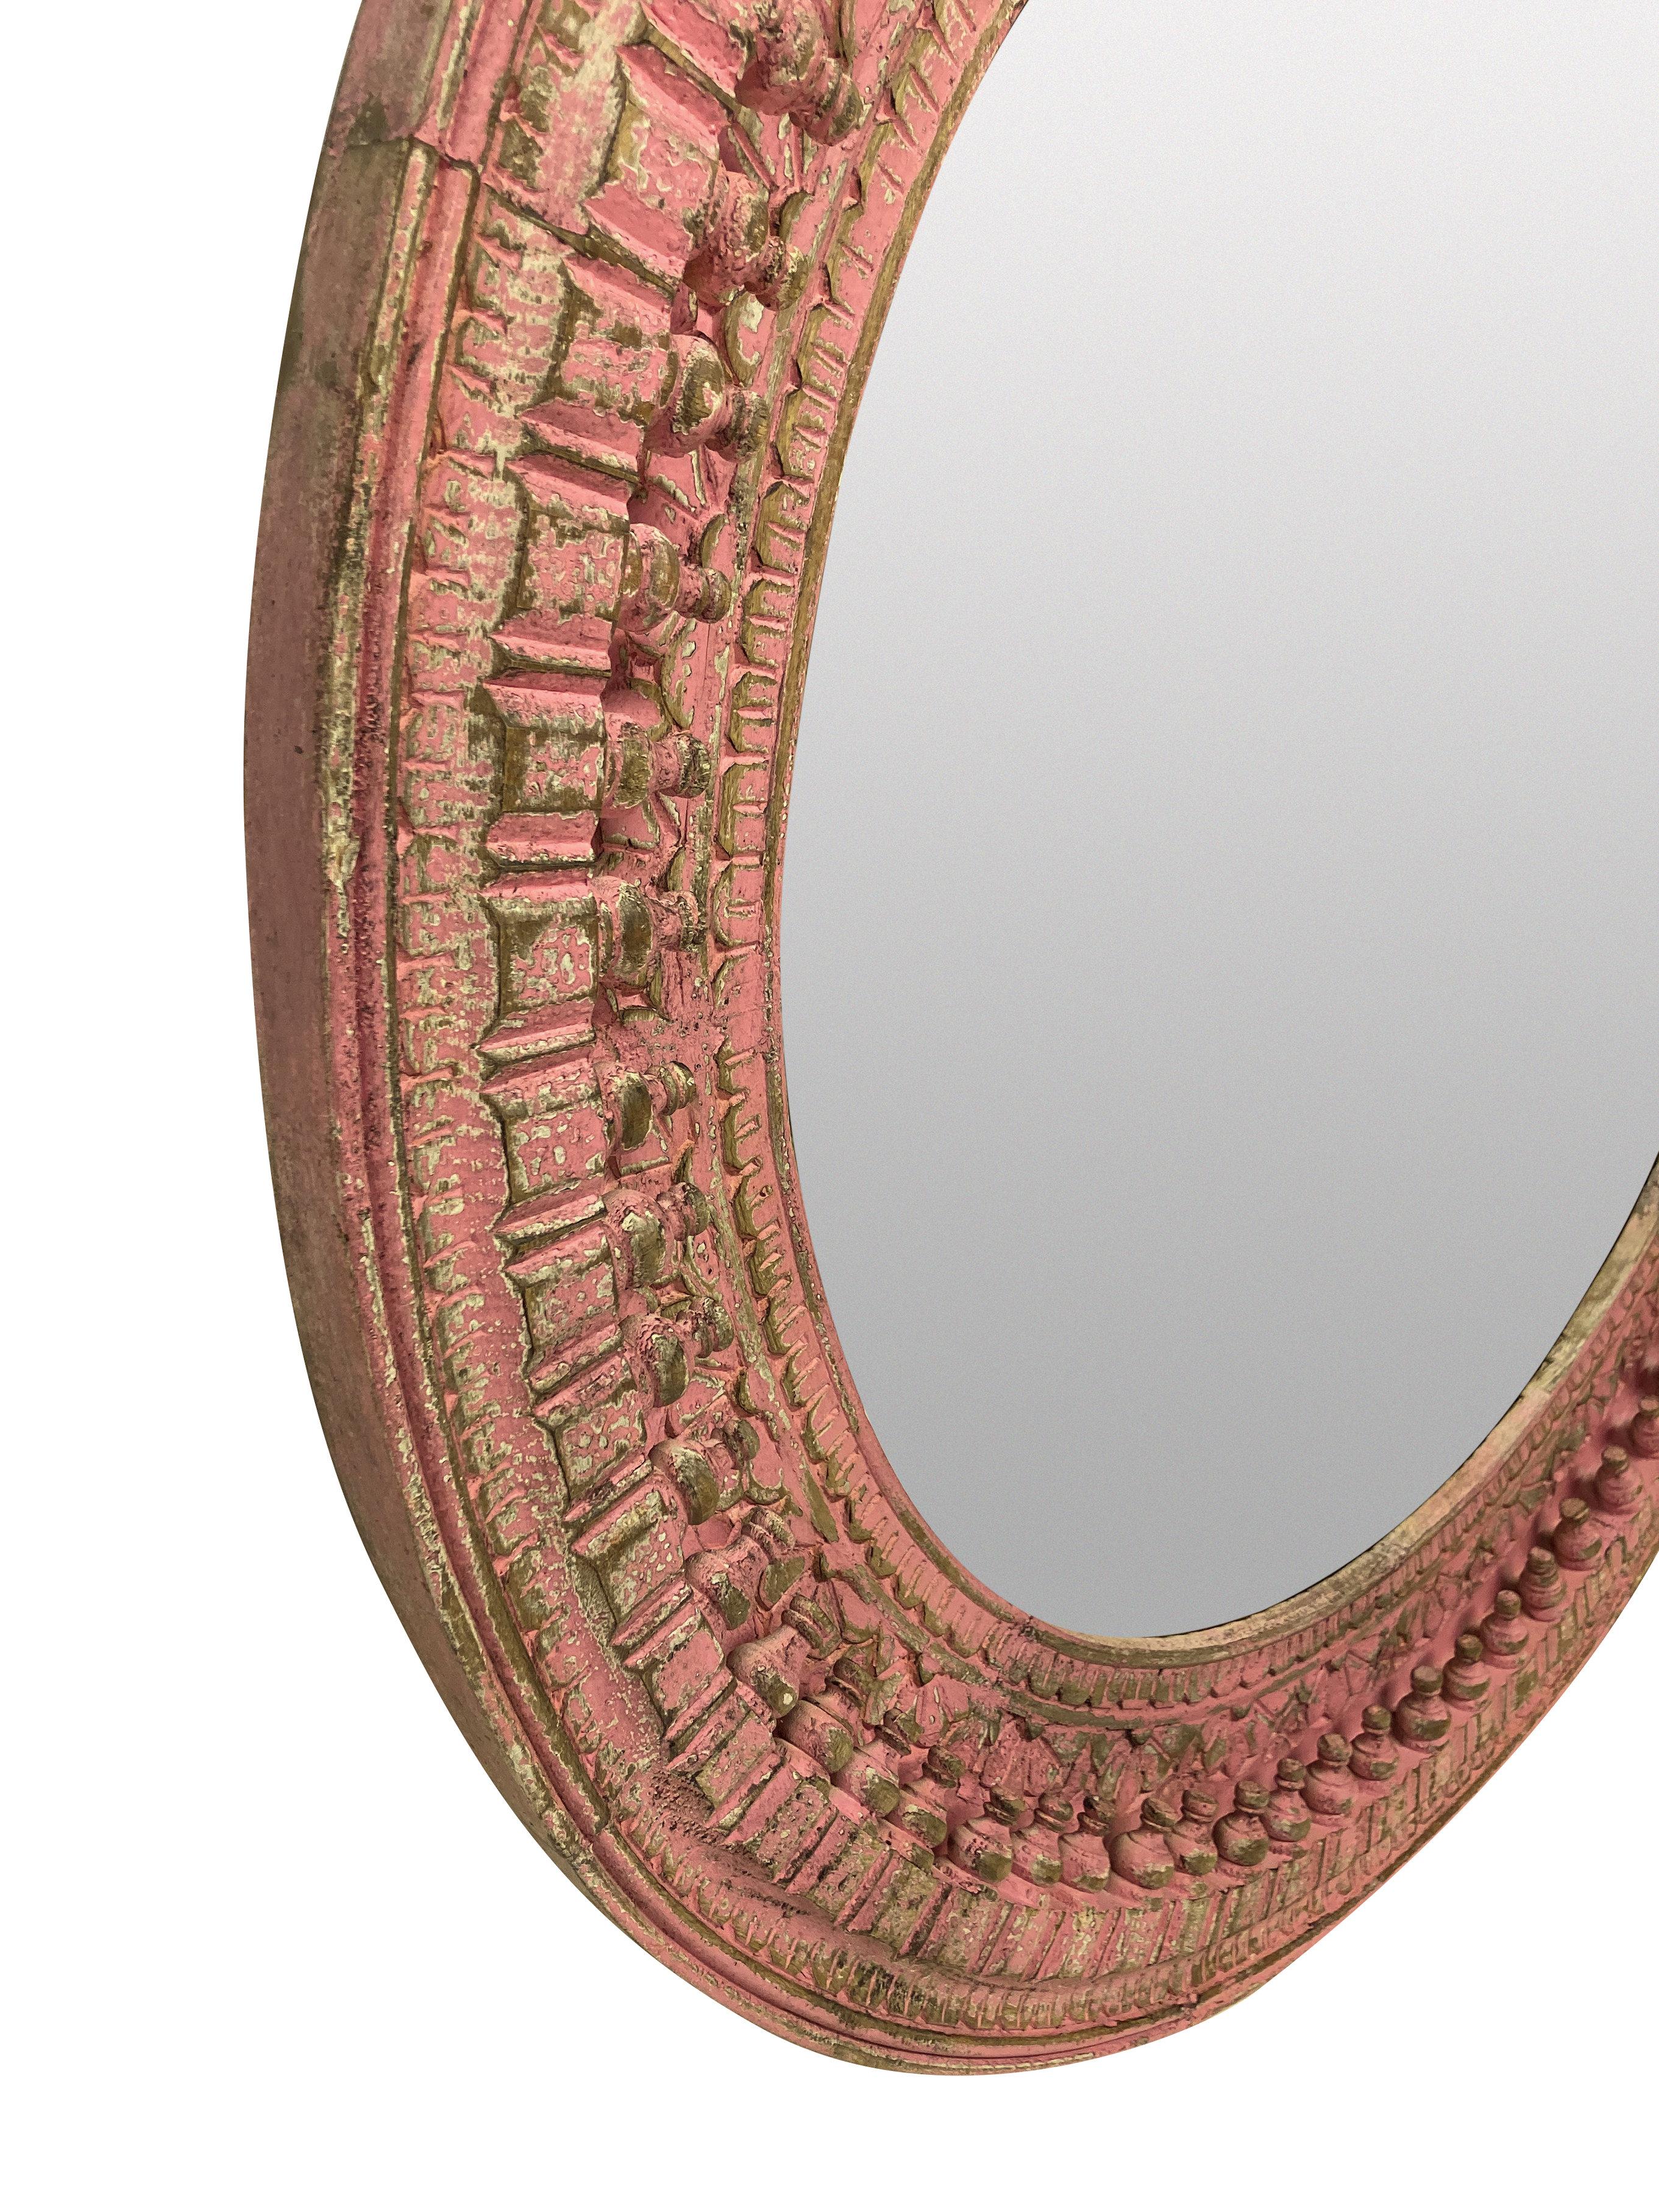 A large Indian carved hardwood circular mirror in delicate pink paints.